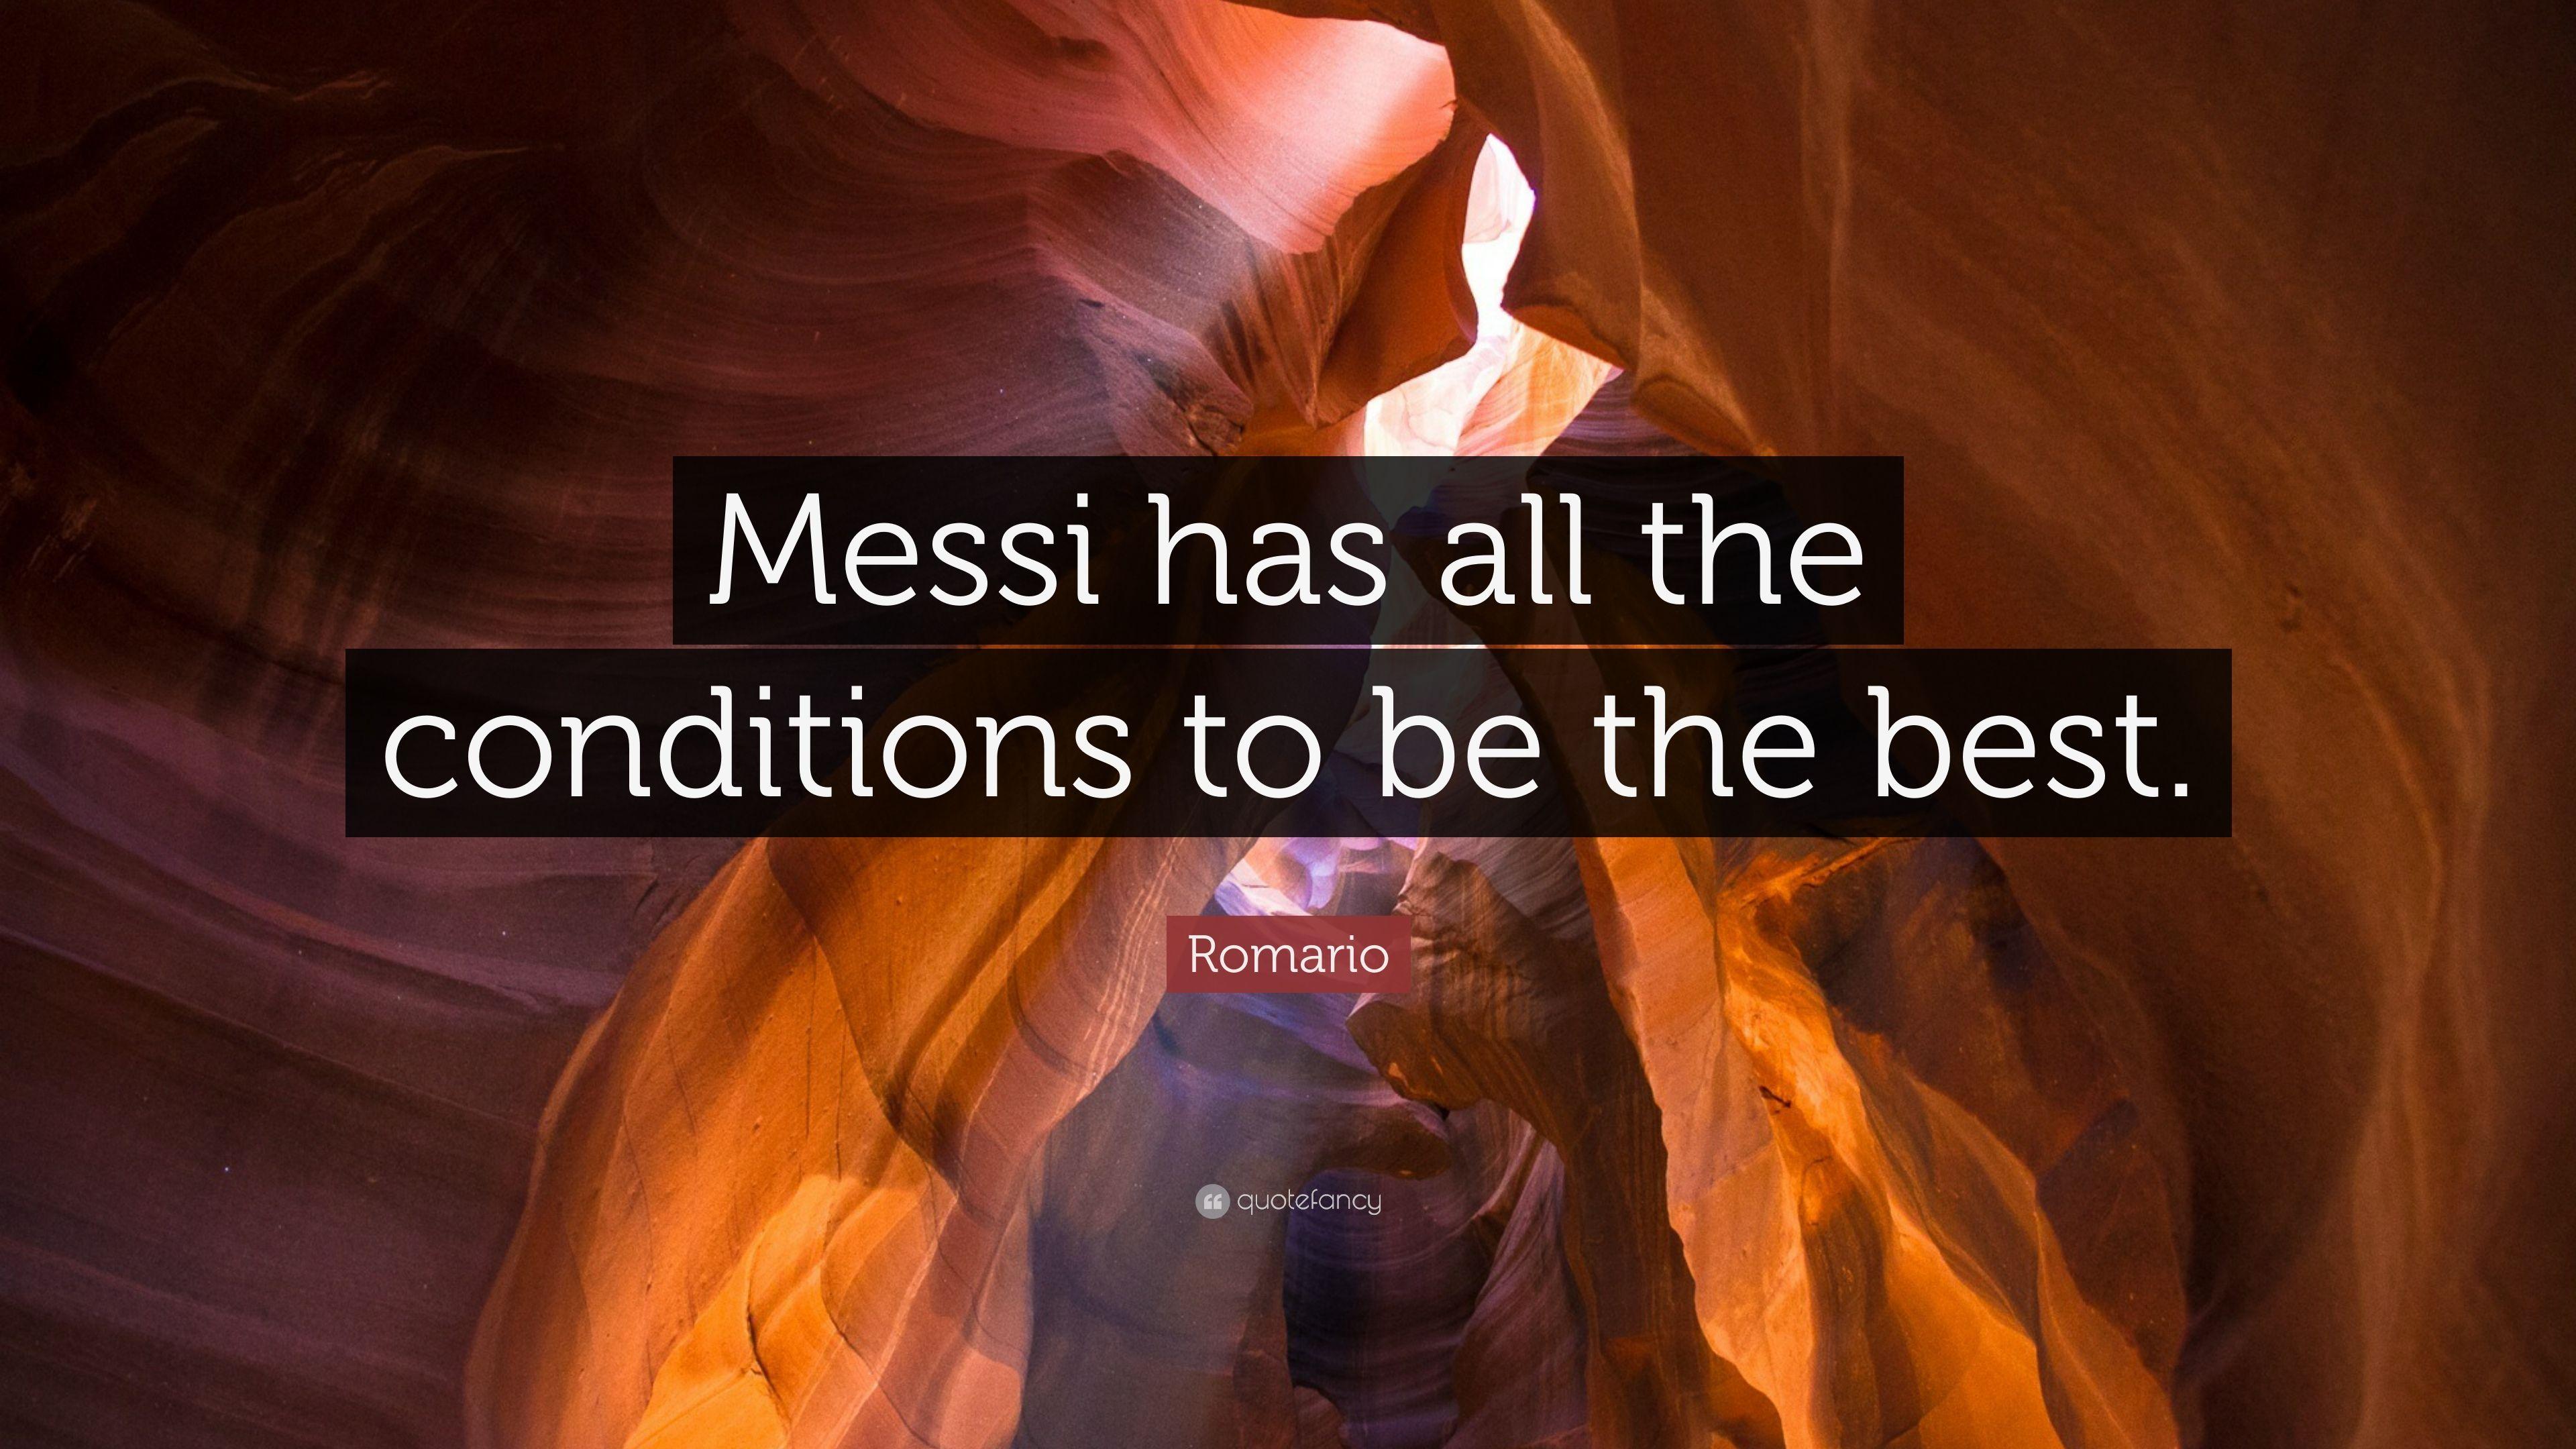 Romario Quote: “Messi has all the conditions to be the best.” 7